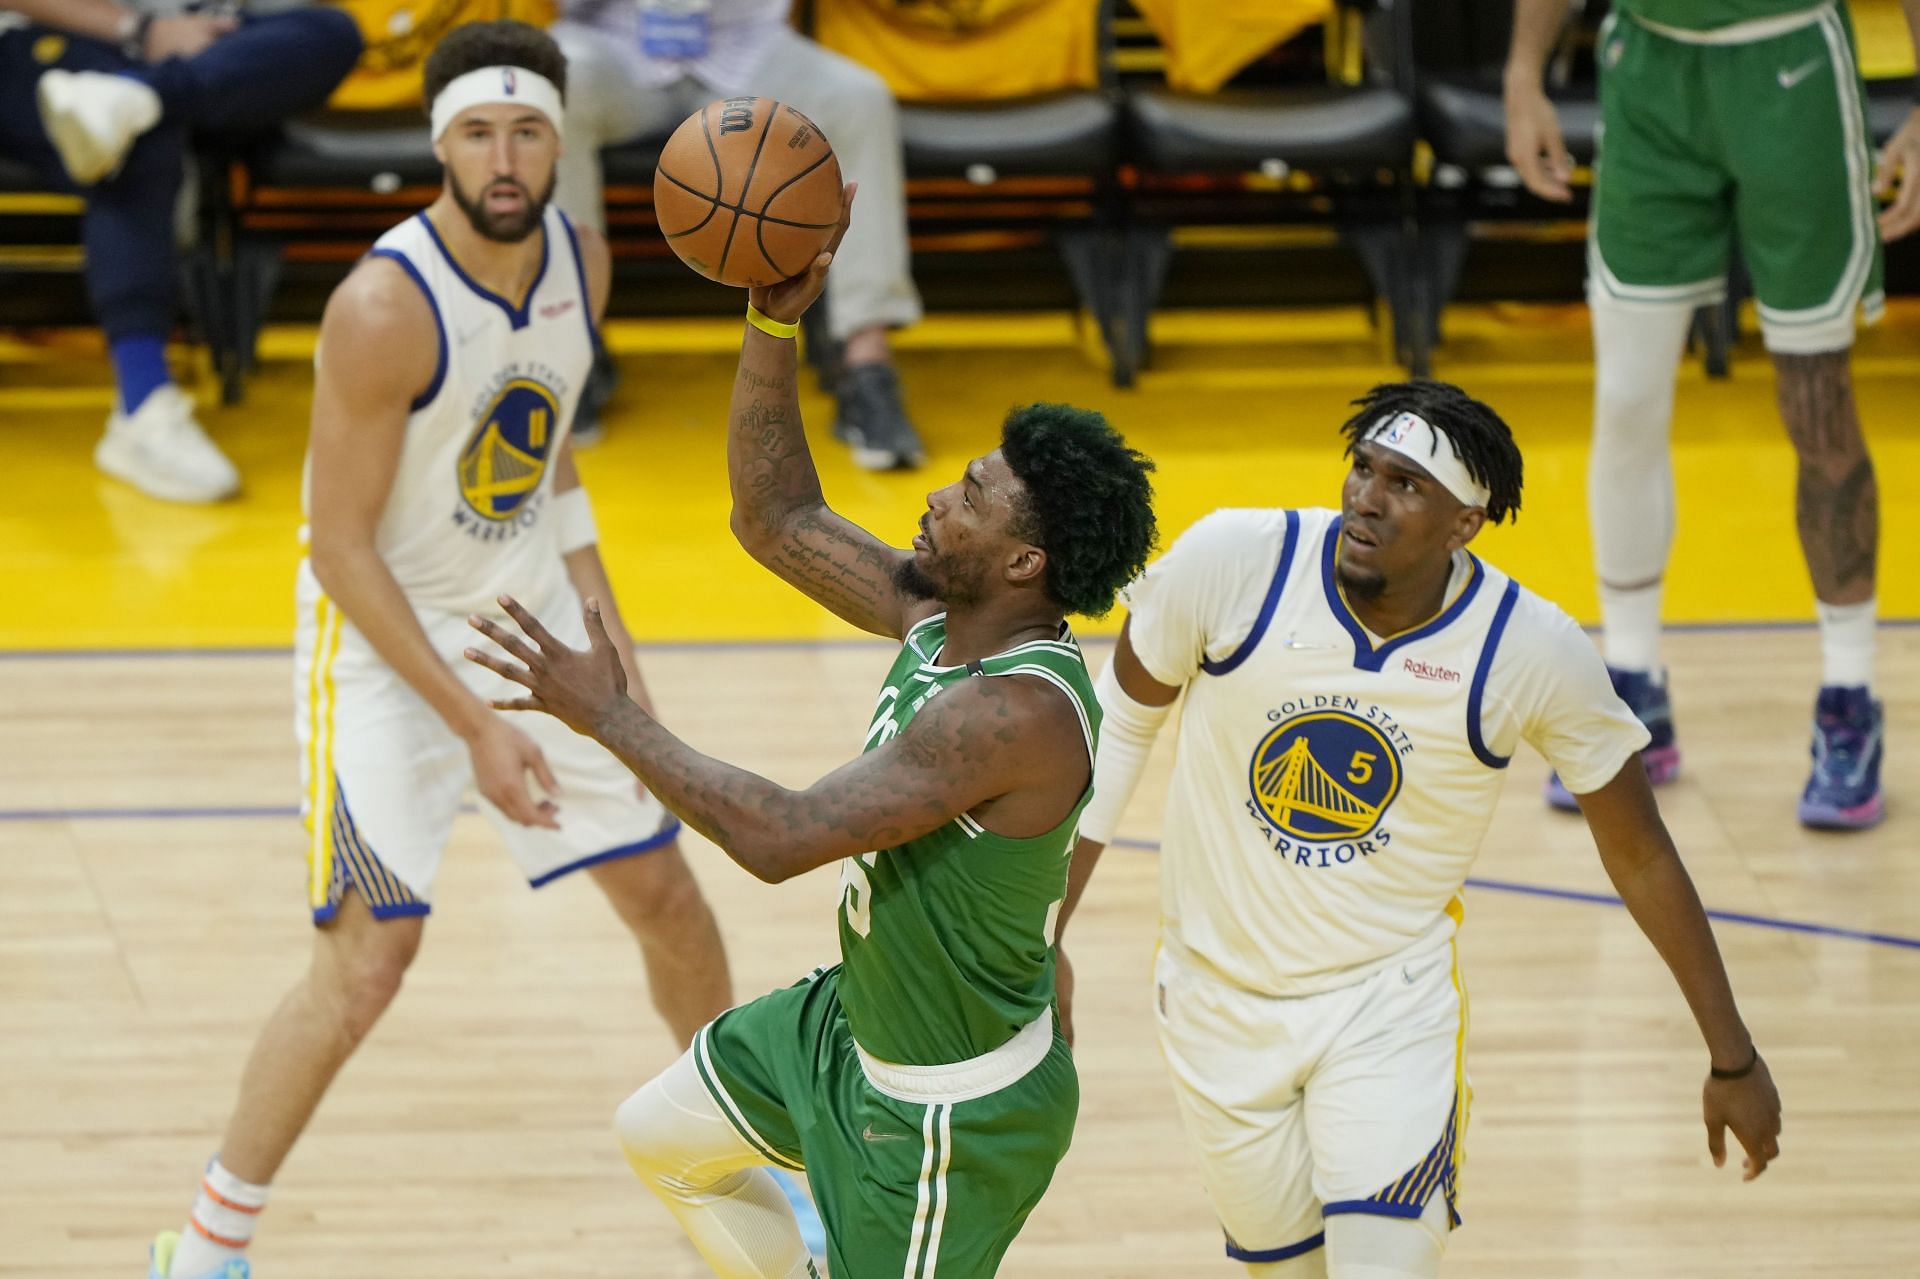 The Golden State Warriors allowed the Celtics to make 51.2 percent of their 3-pointers in Game 1. [Image source: Getty Images]